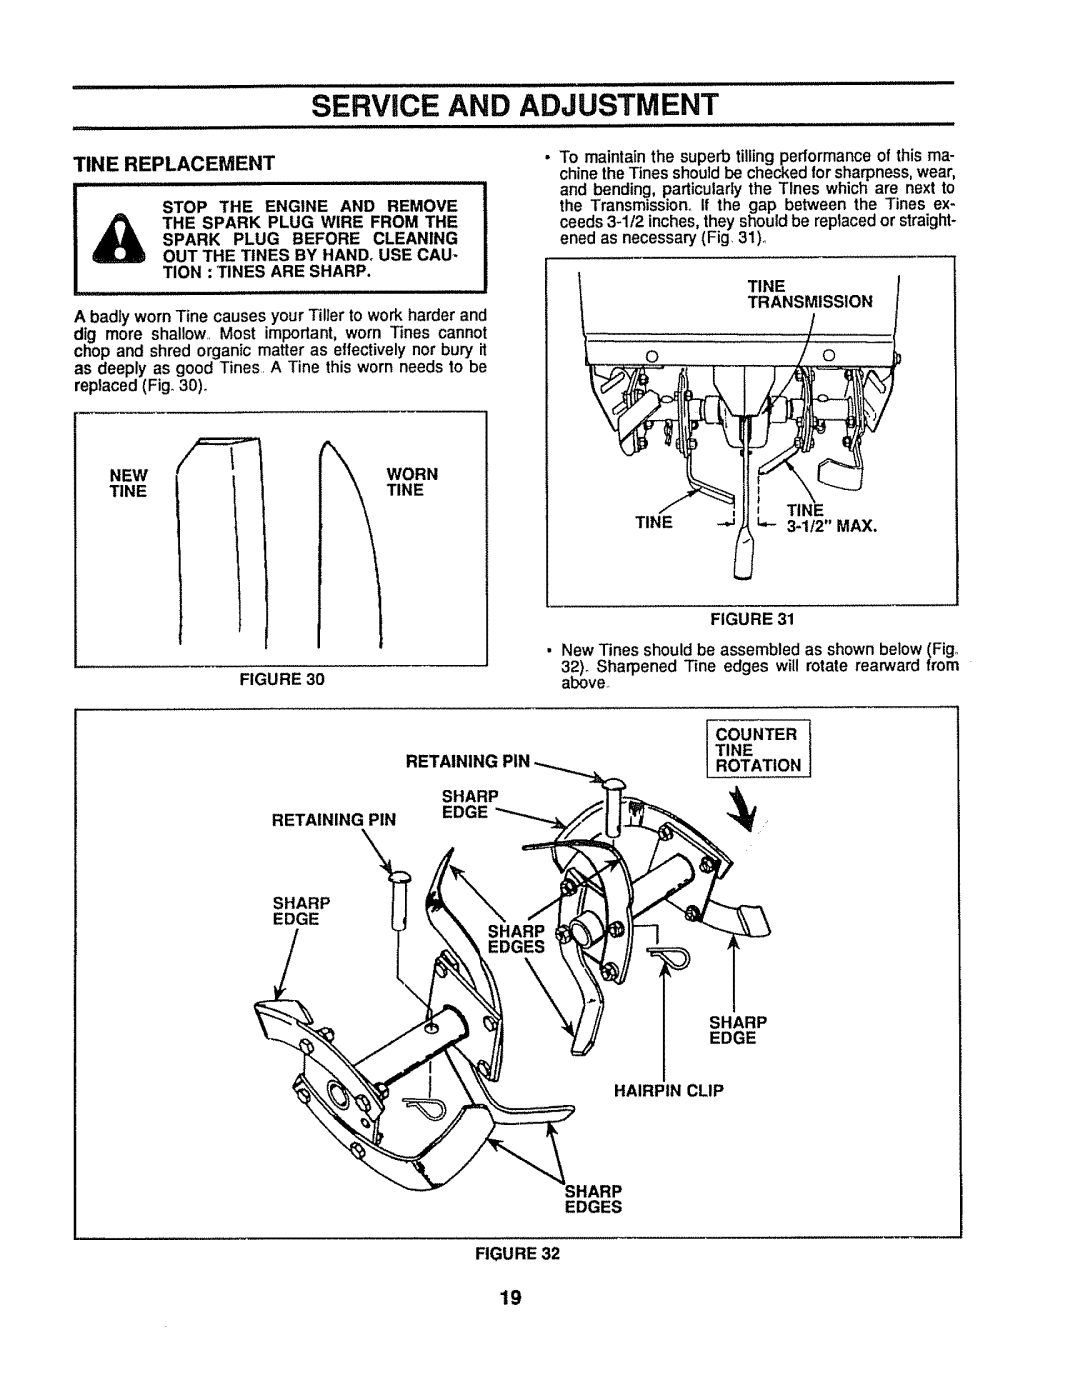 Sears 917.299642 owner manual Service and Adjustment, Tine Replacement 